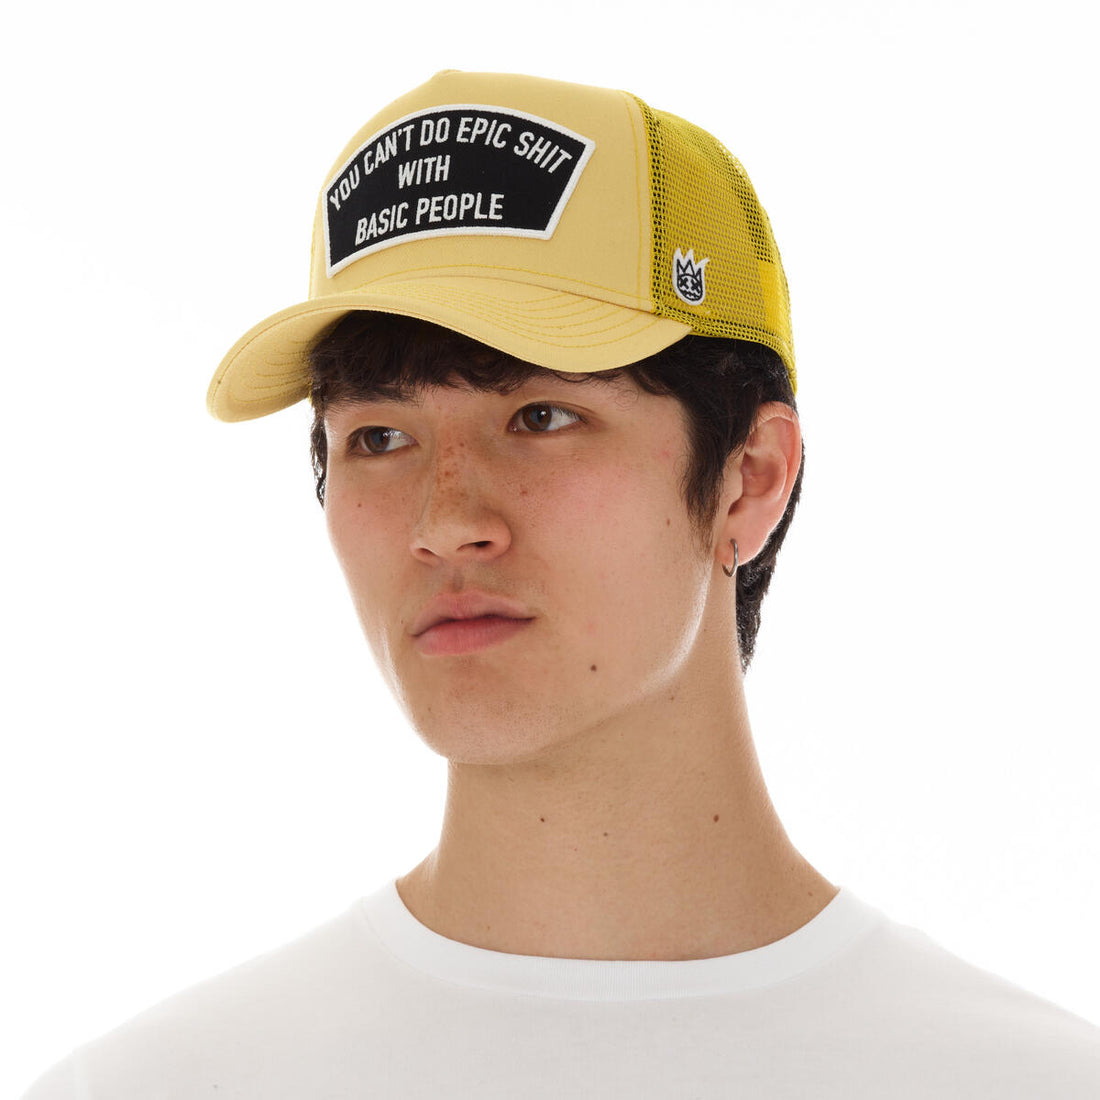 Cult "CAN'T DO EPIC SHIT" MESH BACK TRUCKER CURVED VISOR (624AC-CH61A)